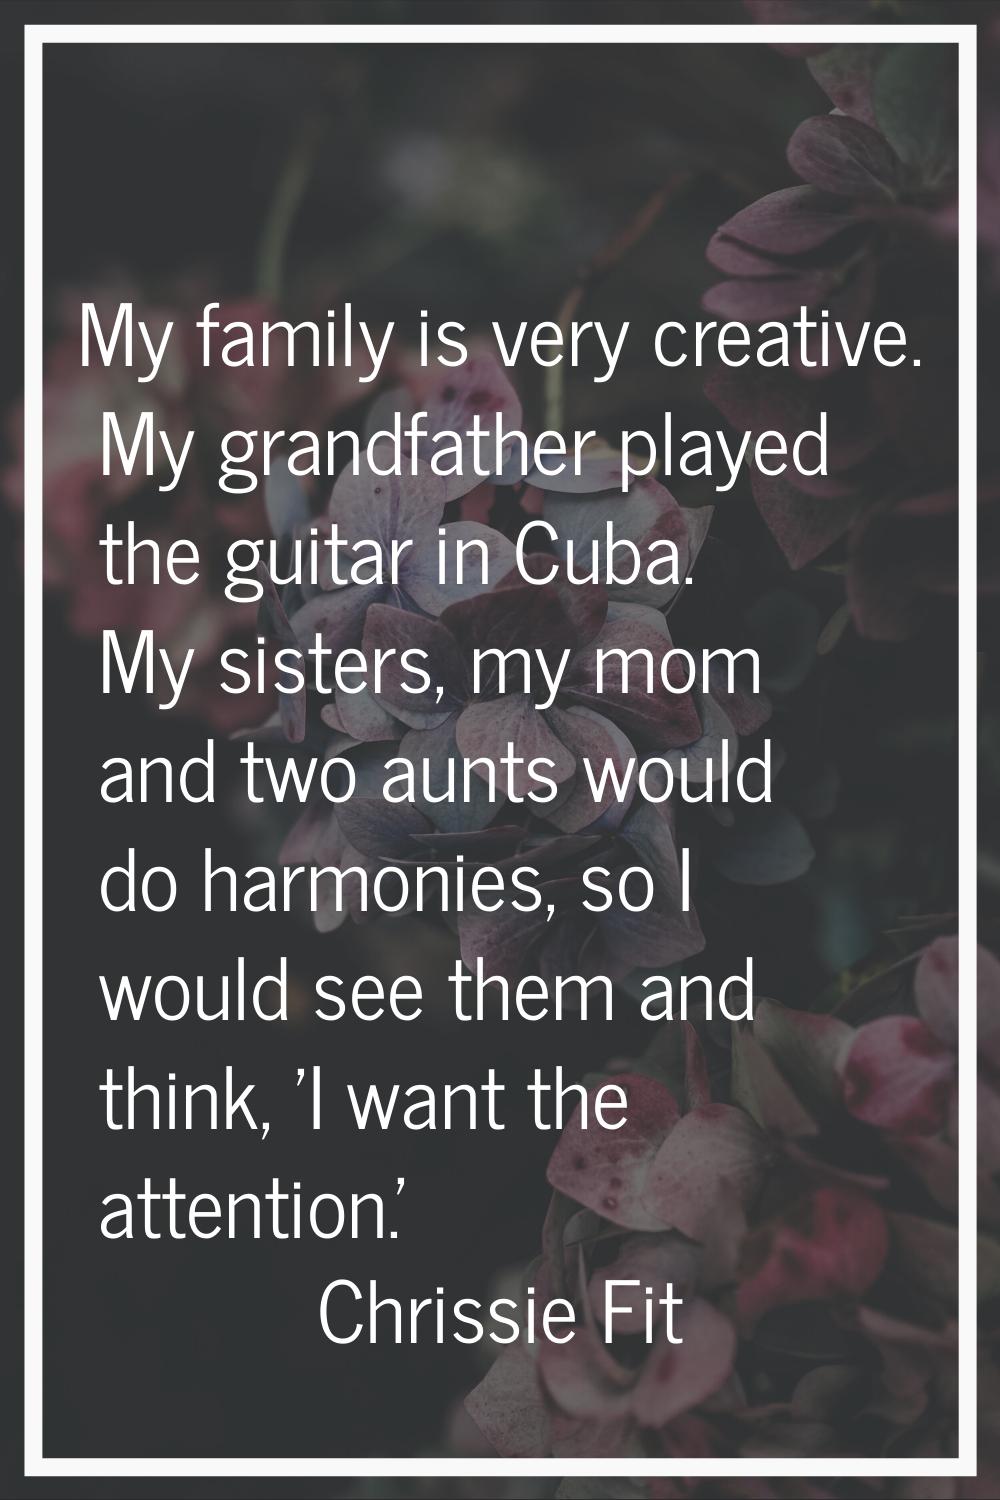 My family is very creative. My grandfather played the guitar in Cuba. My sisters, my mom and two au